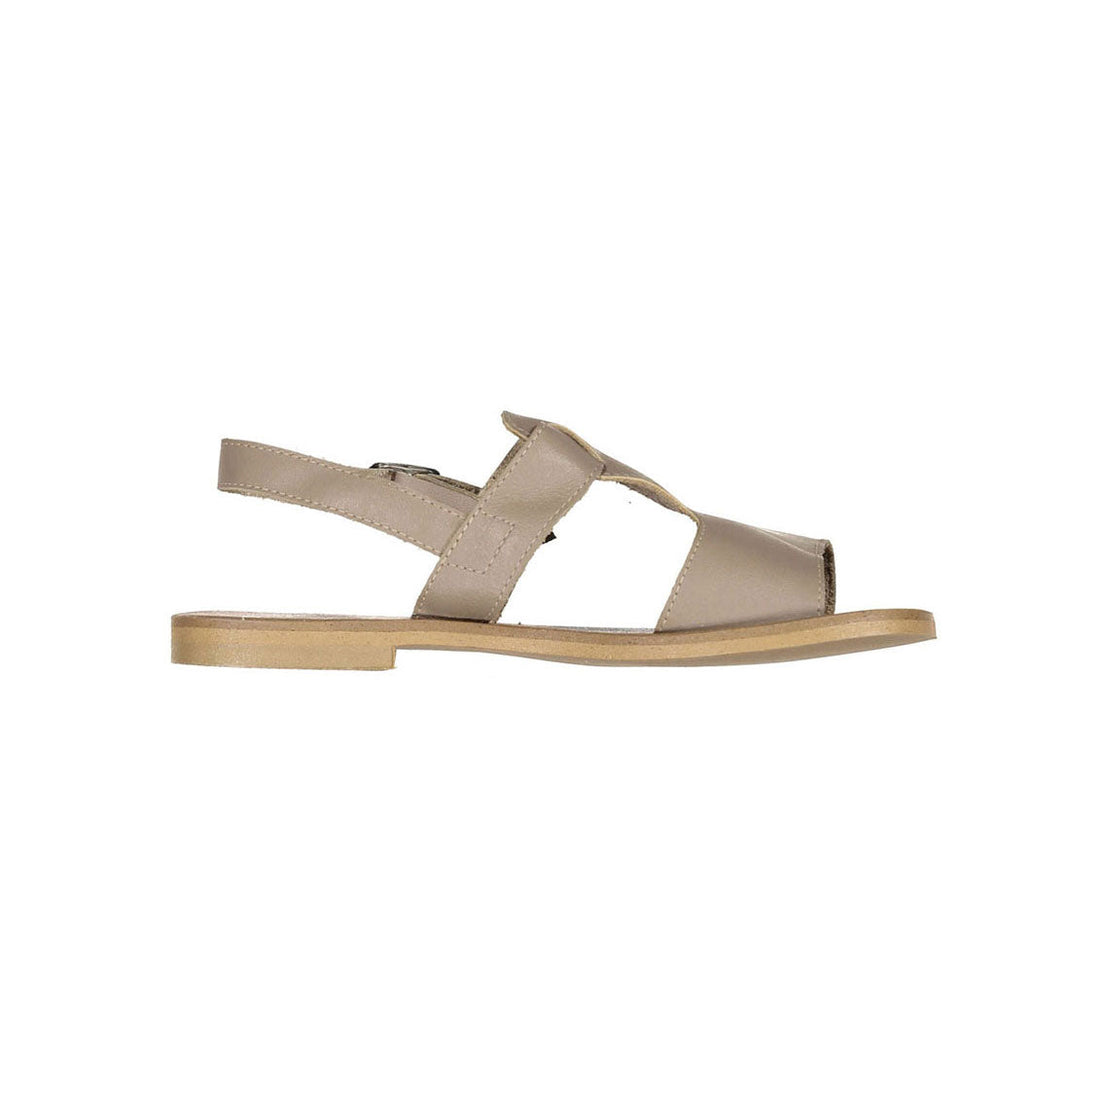 Sonatina shoes Sonatina Taupe Leather Tain Up Sandals